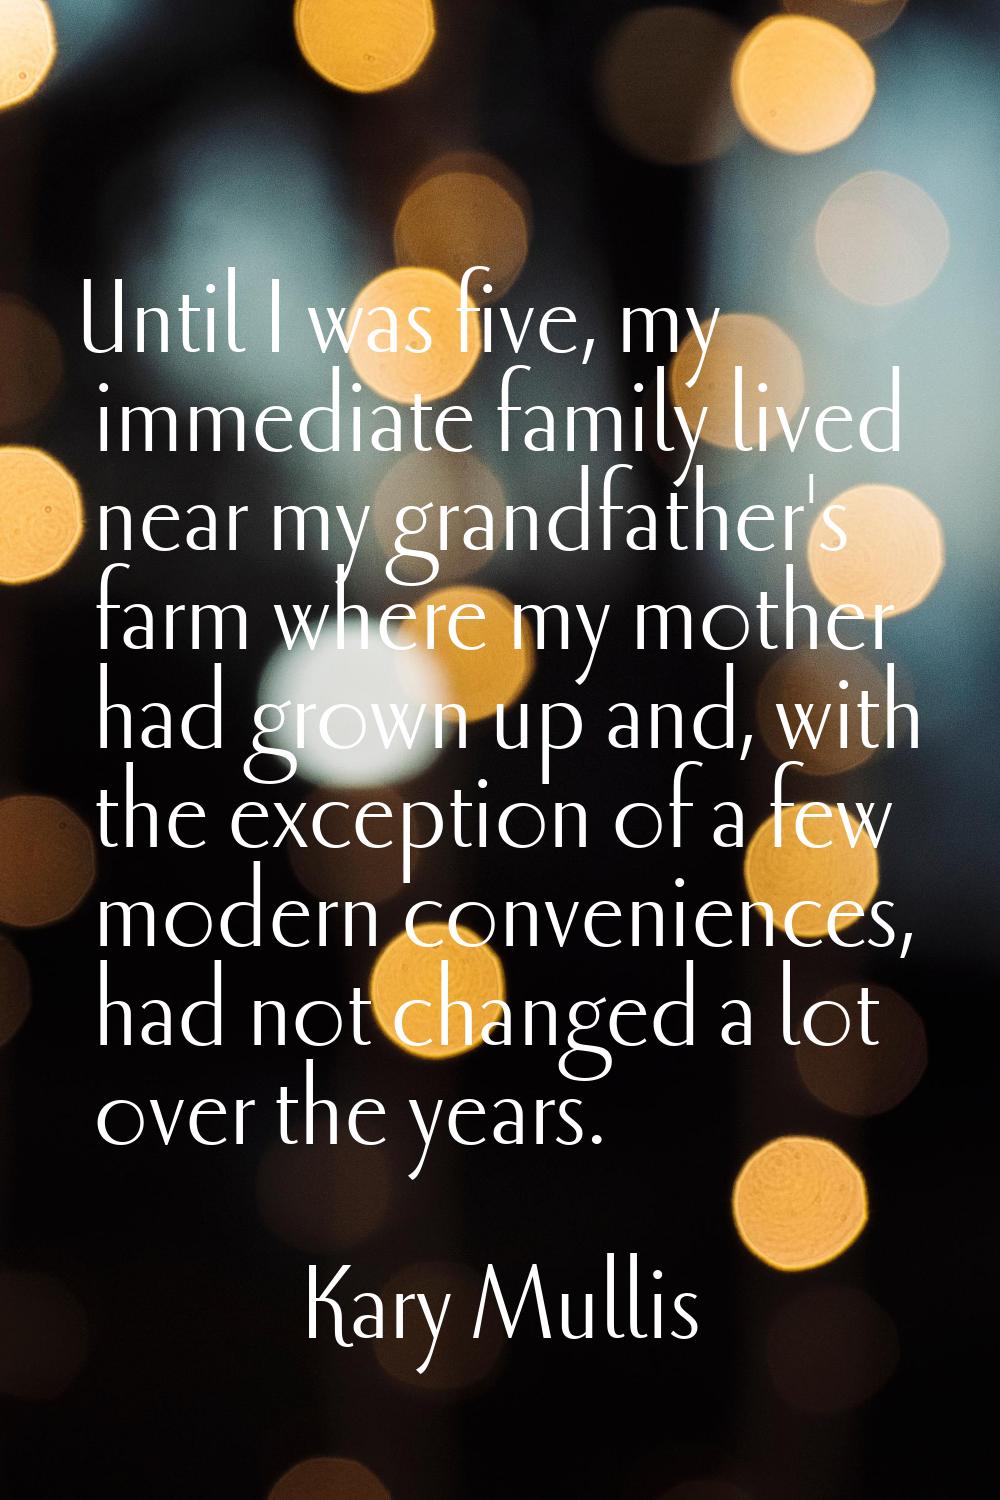 Until I was five, my immediate family lived near my grandfather's farm where my mother had grown up